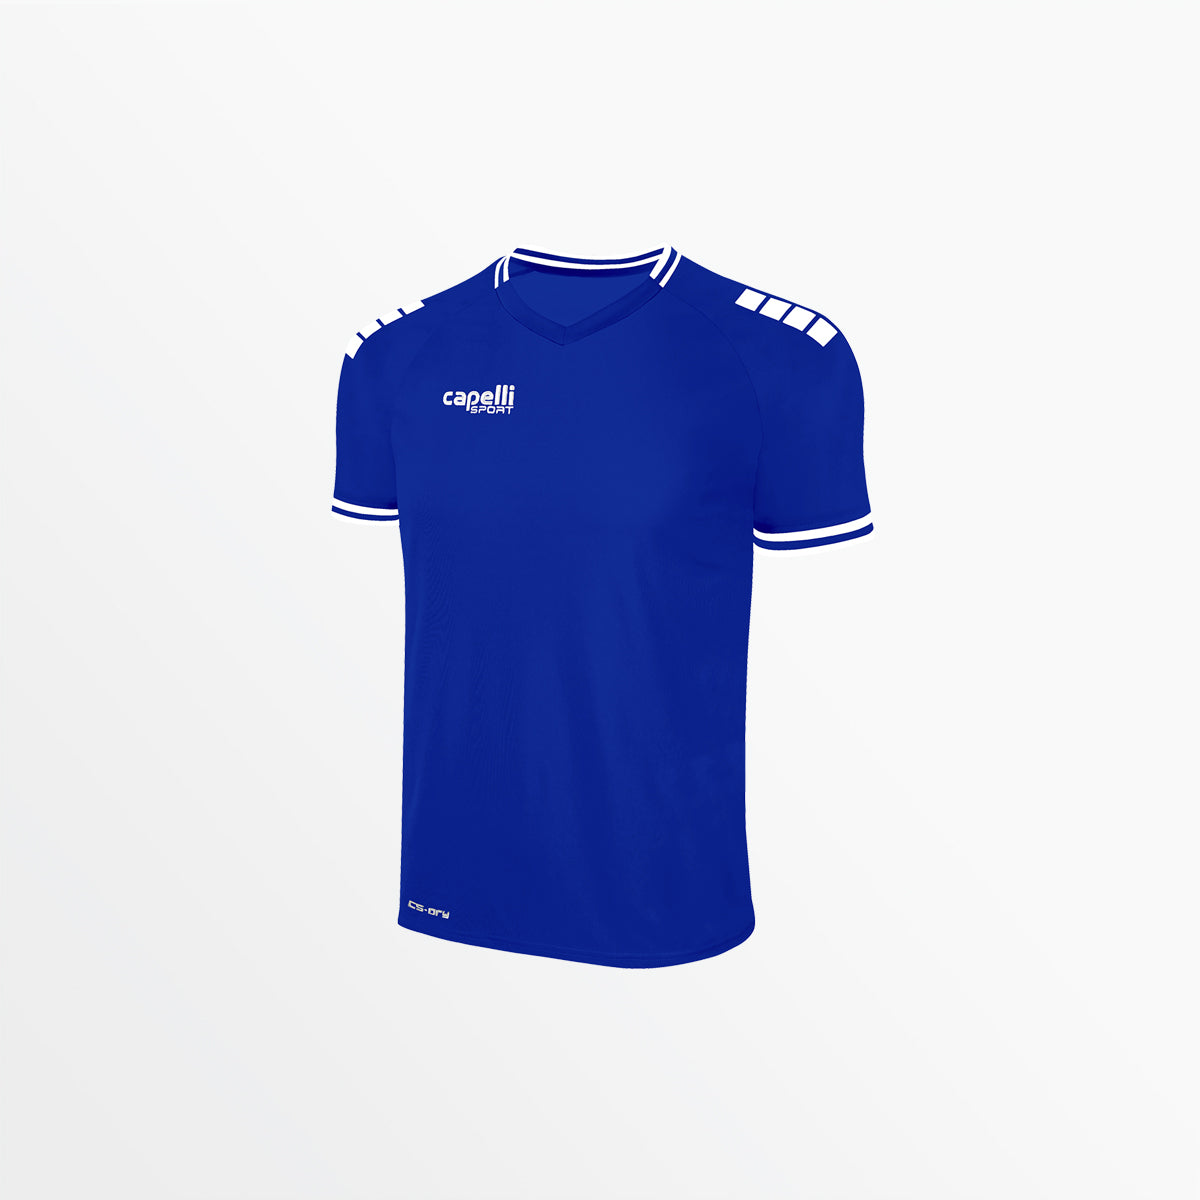 YOUTH CHELSEA I JERSEY